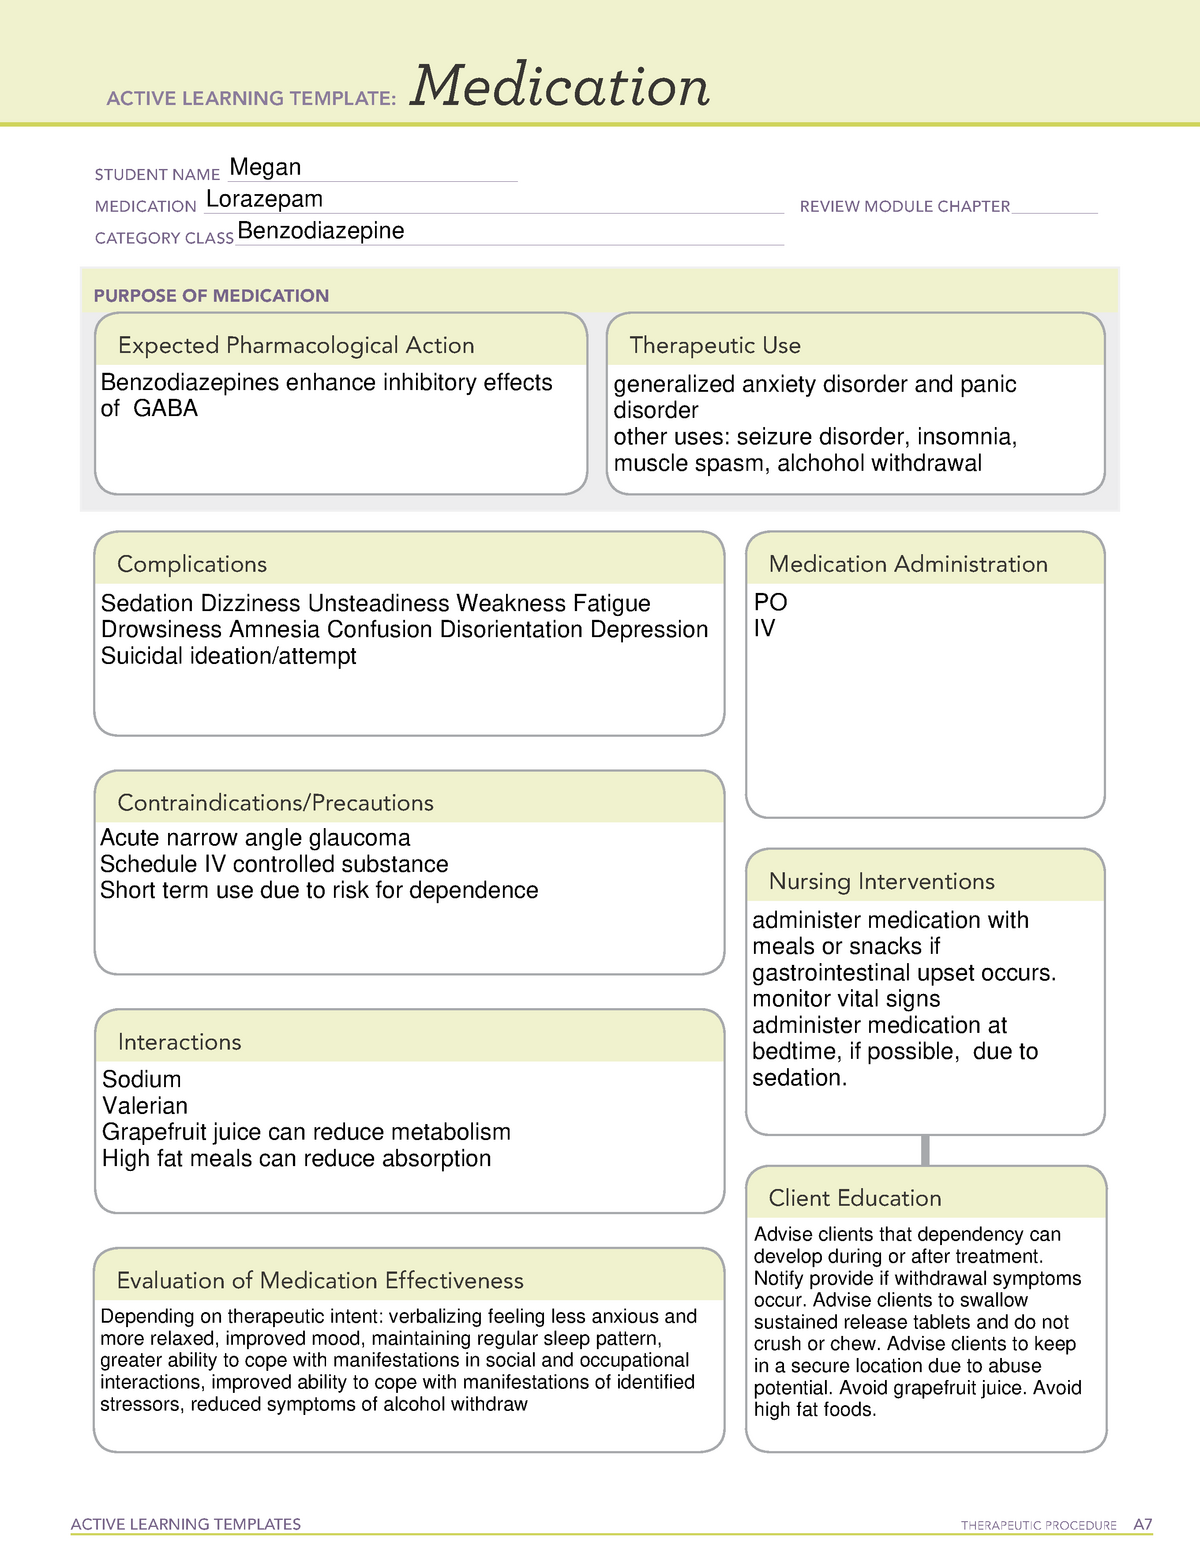 Active Learning Template medication Lorazepam - ACTIVE LEARNING ...